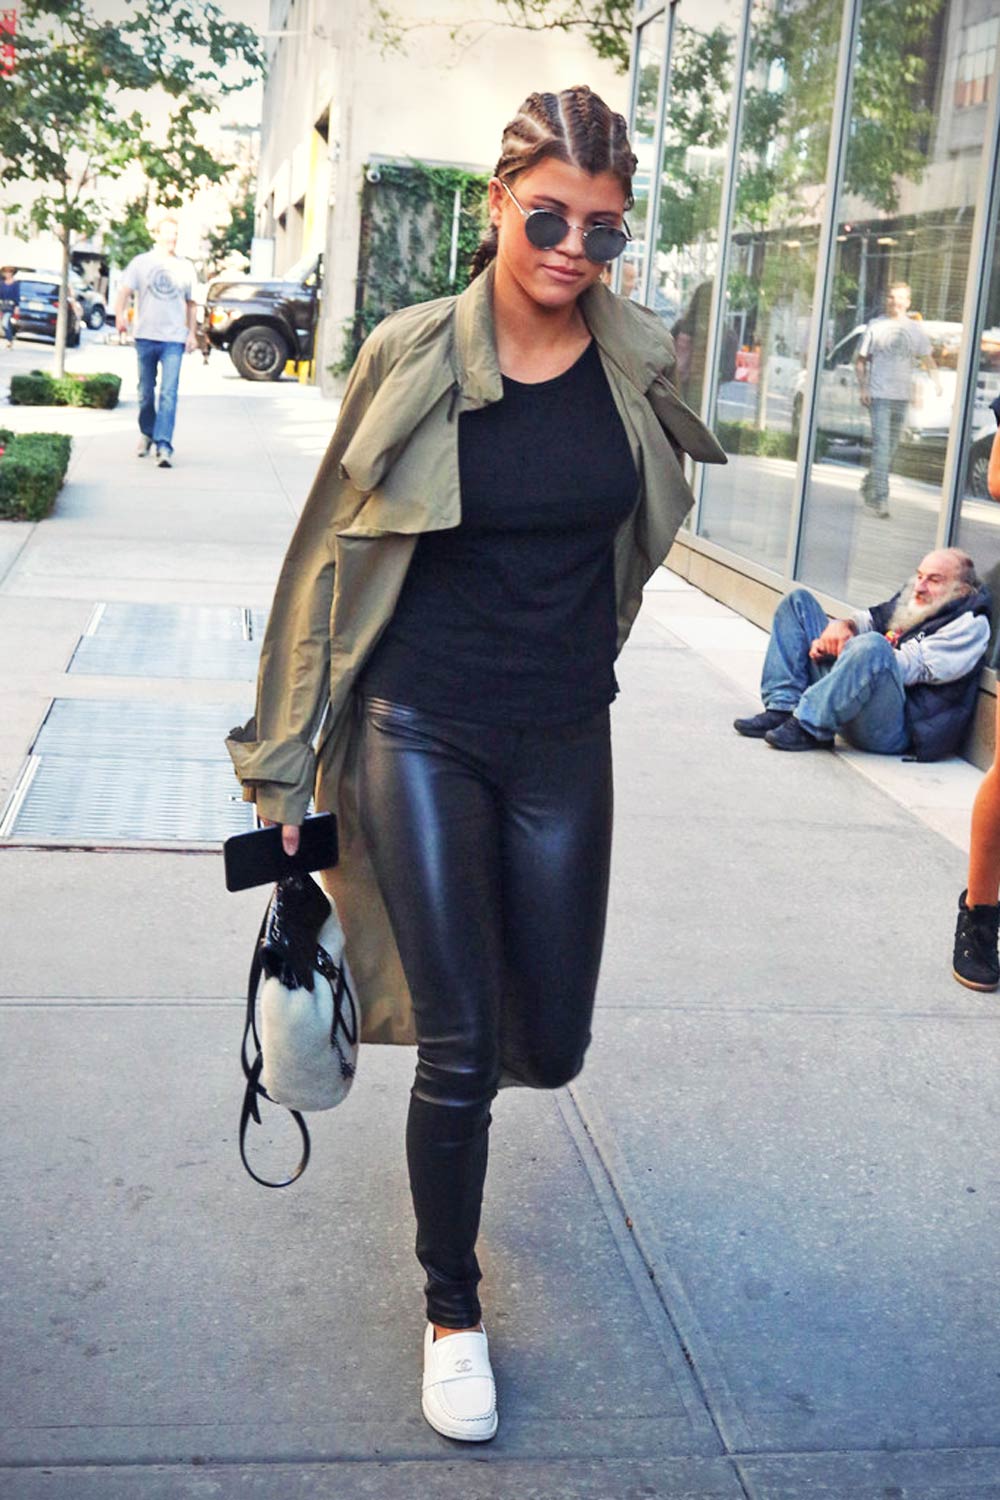 Sofia Richie out in NYC